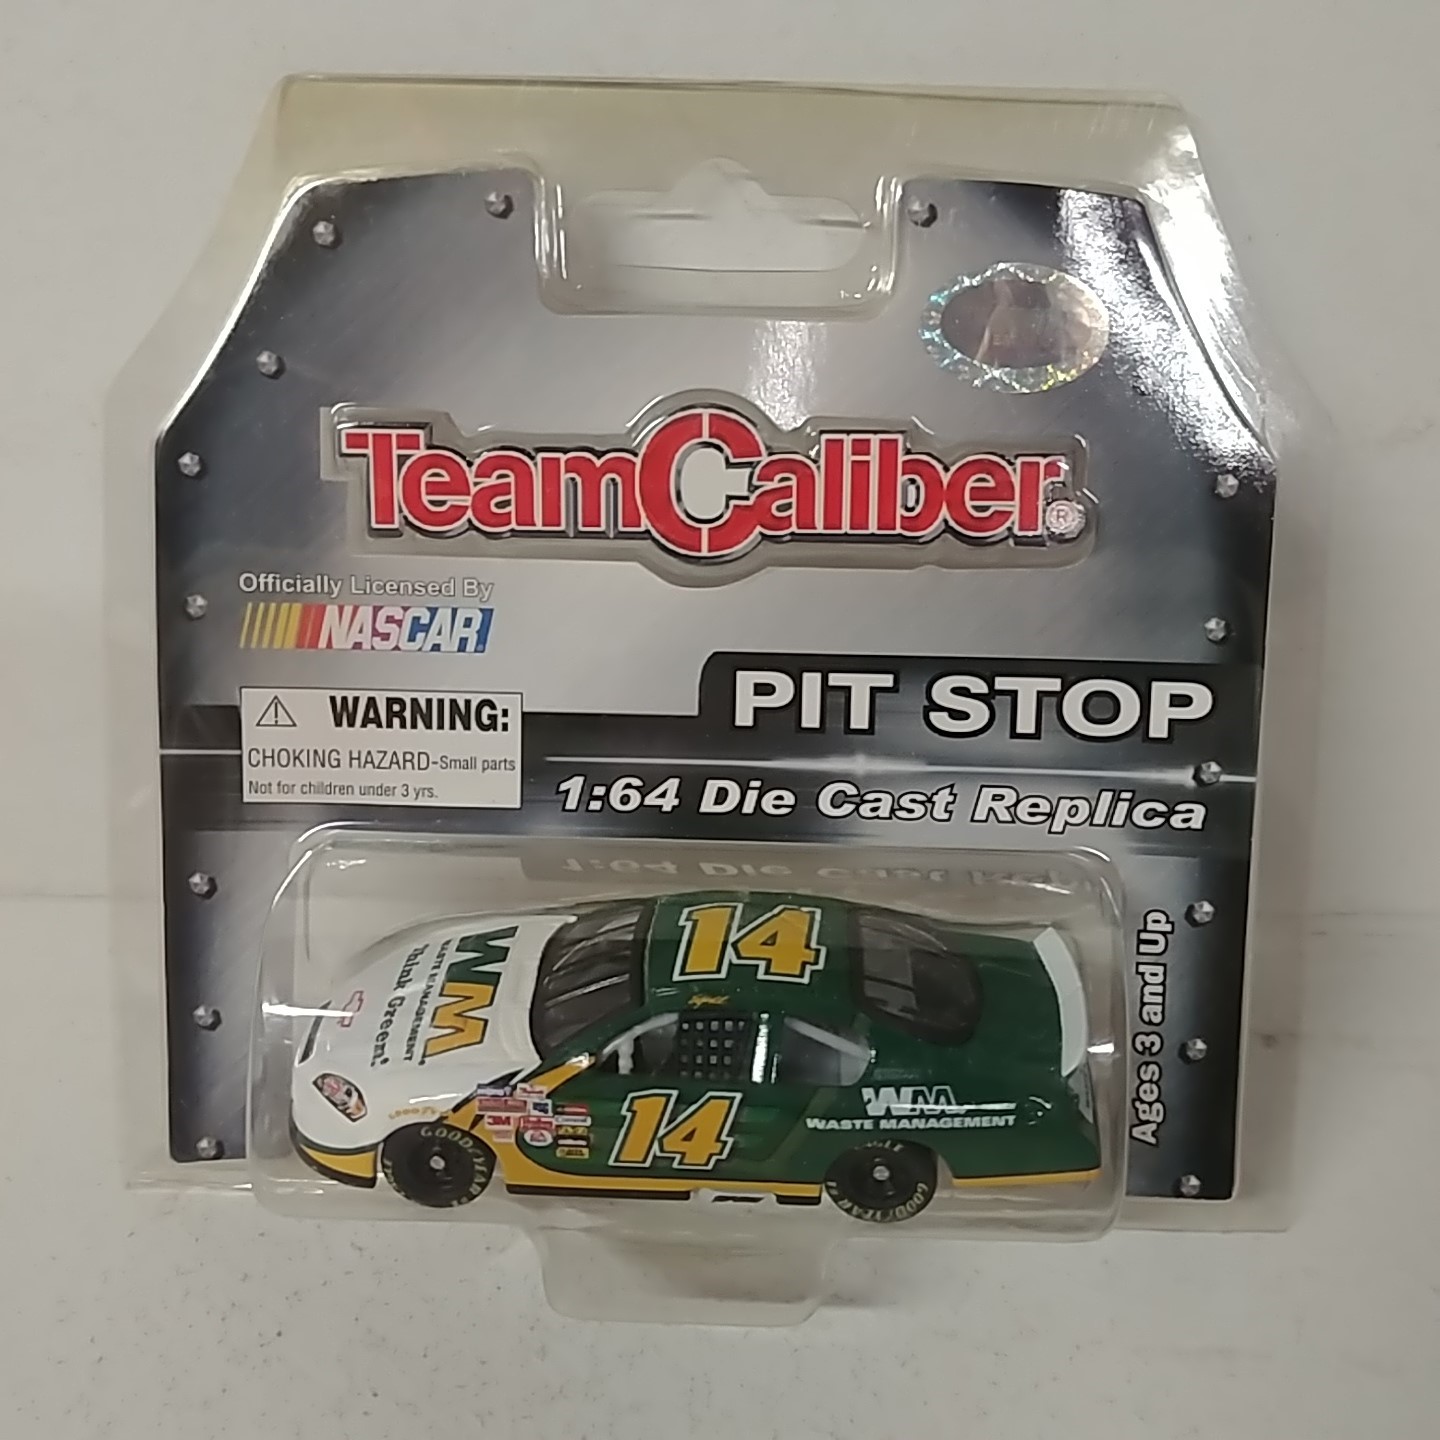 2006 Sterling Marlin 1/64th Waste Management Pitstop Series car